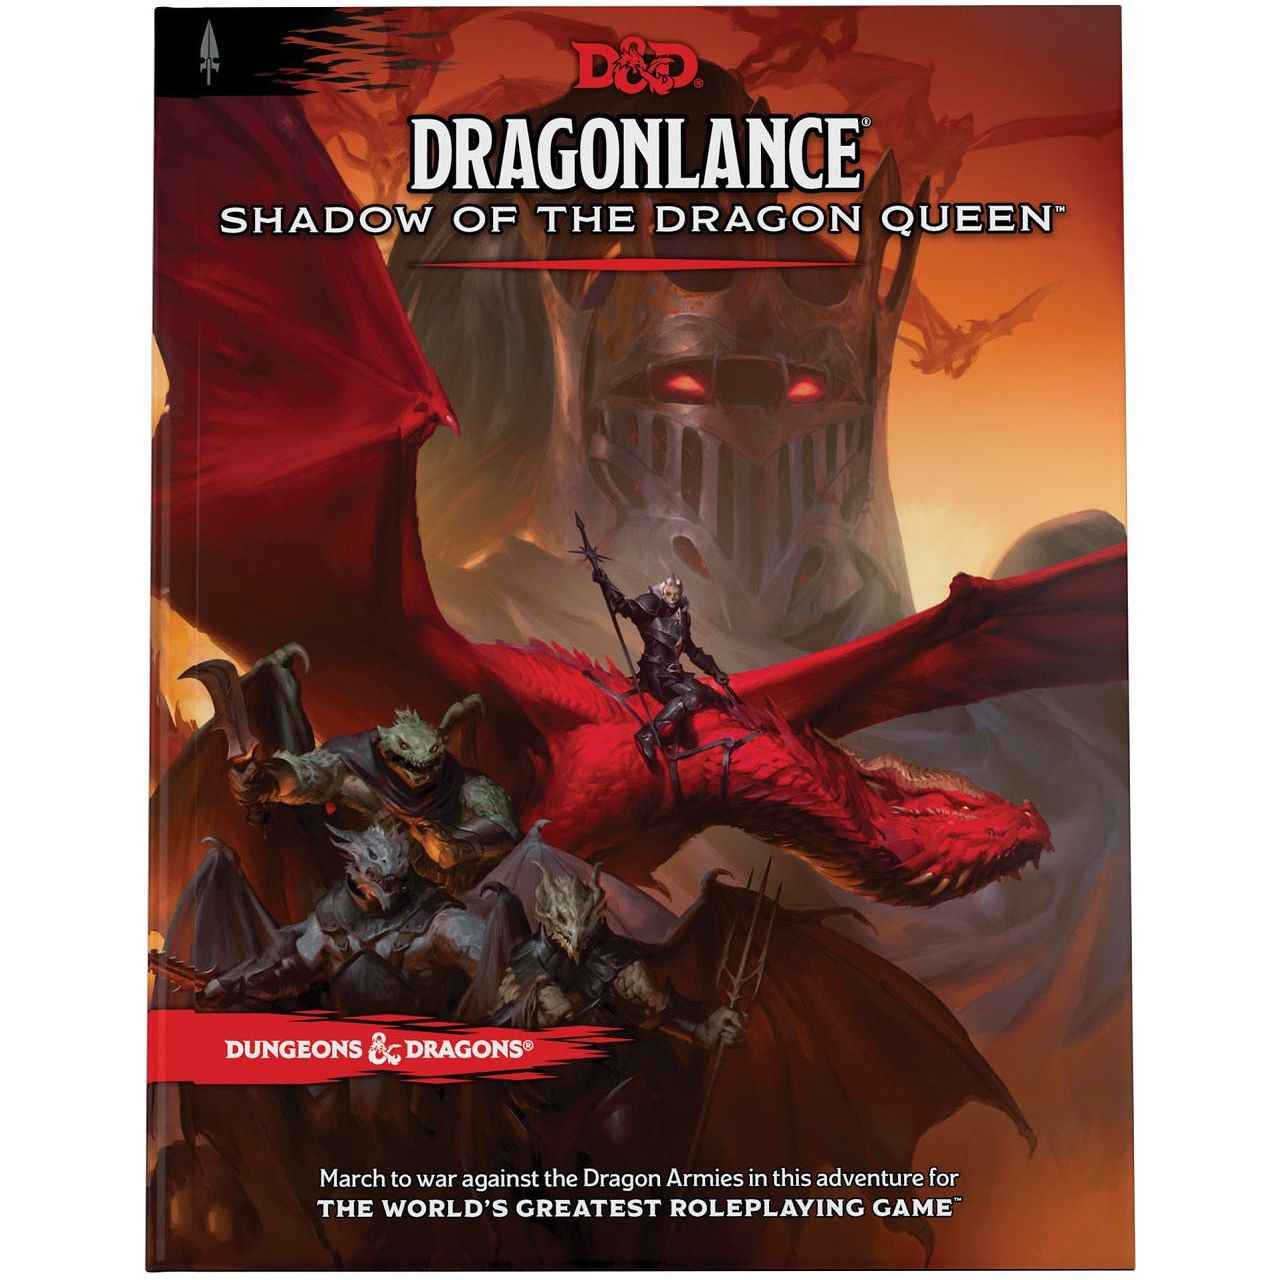 D&D - Dragonlance - Shadow of the Dragon Queen